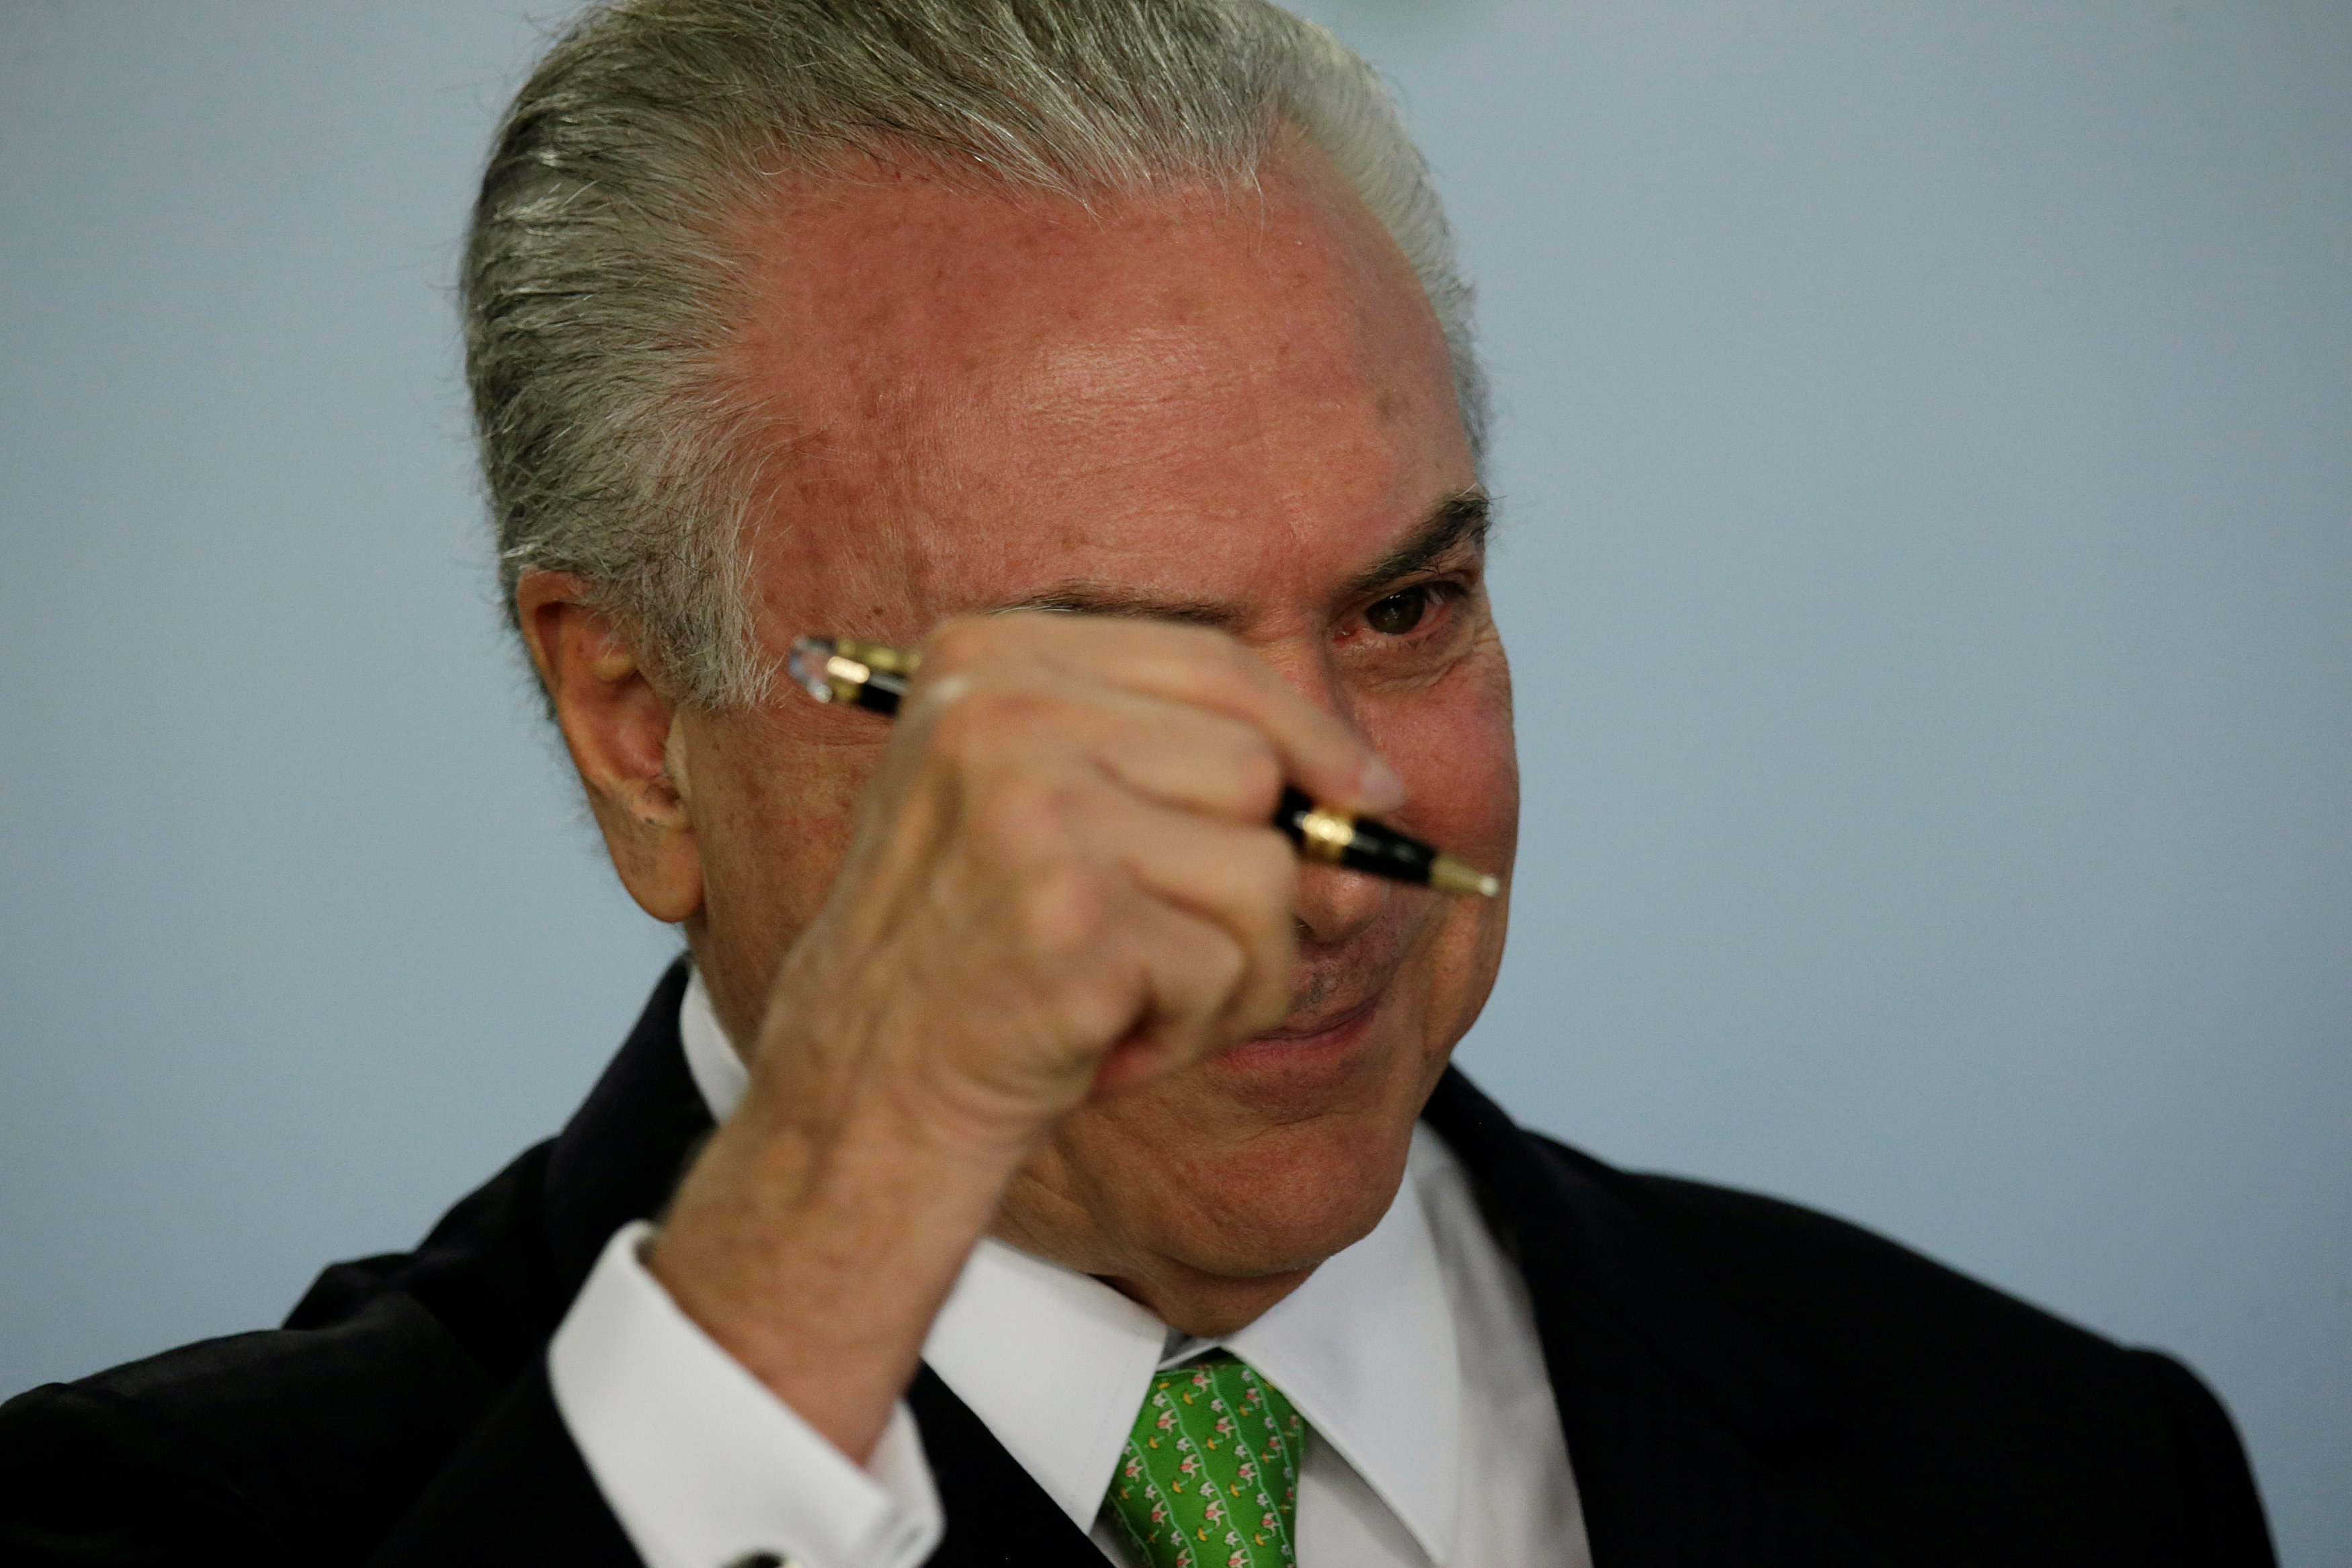 Court to open case that could unseat Brazil's Temer